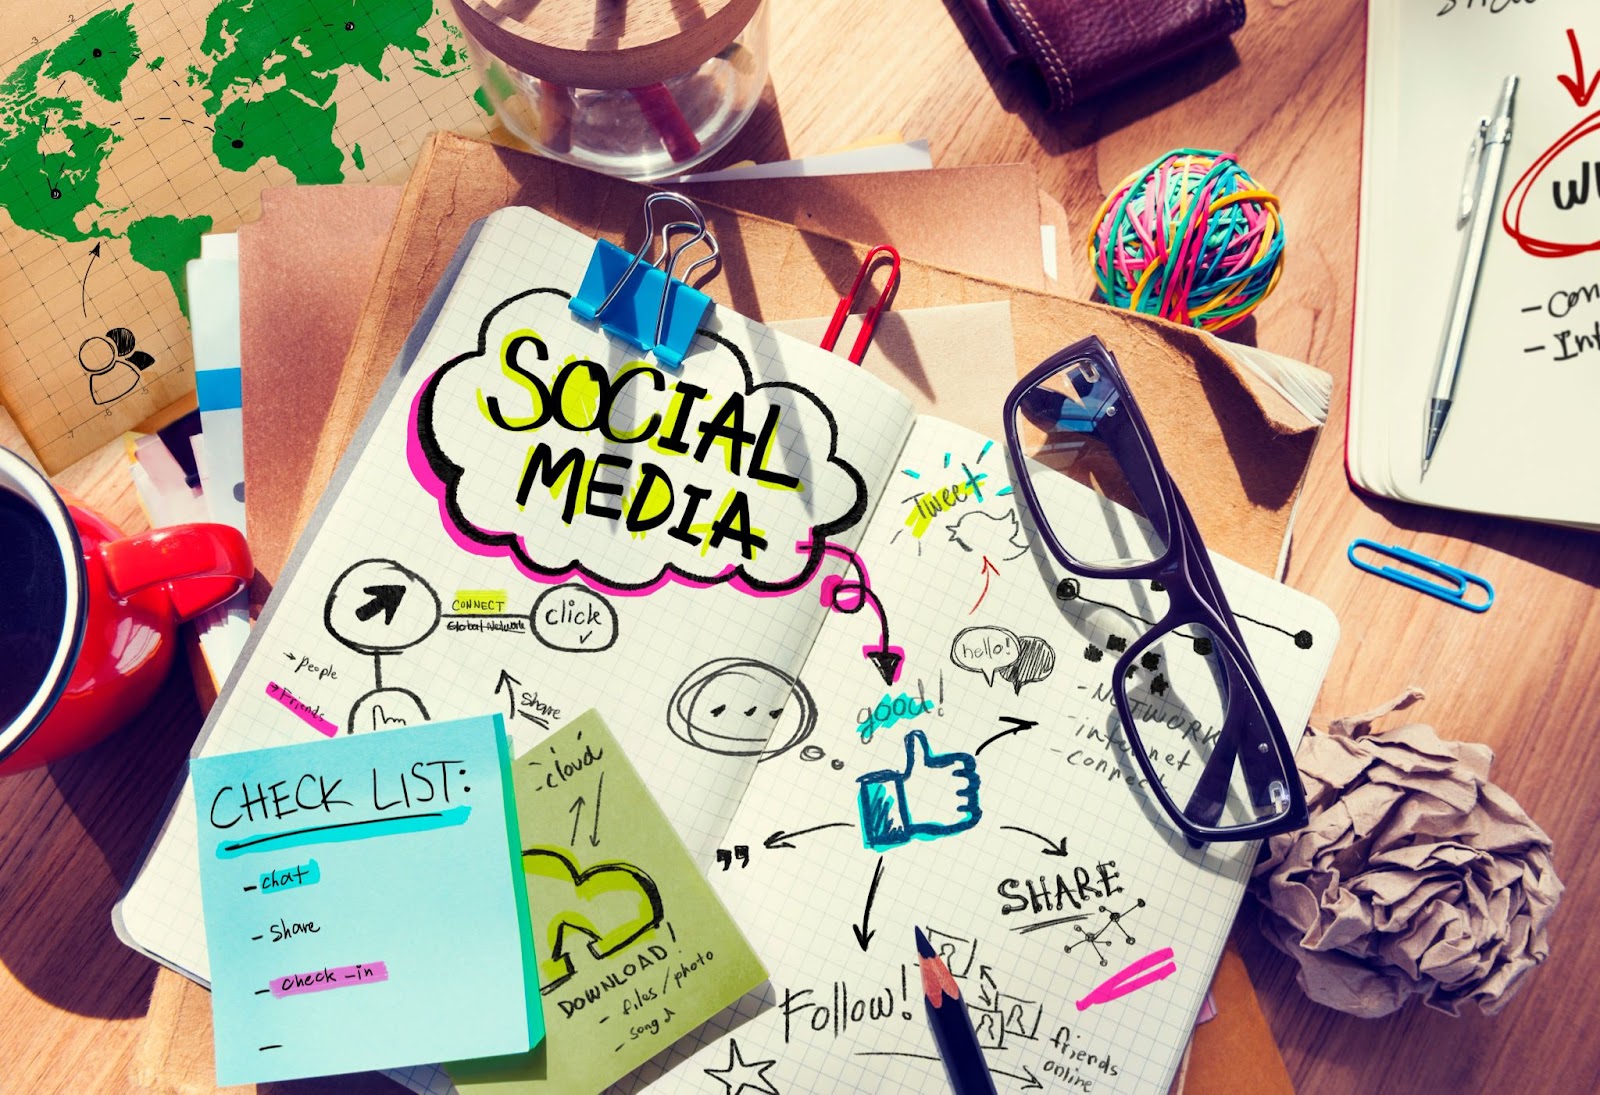 Go with IM Solutions top social media advertising company to get the end-to-end social media marketing services. Hire the best SMM Company in Bangalore for your needs.
